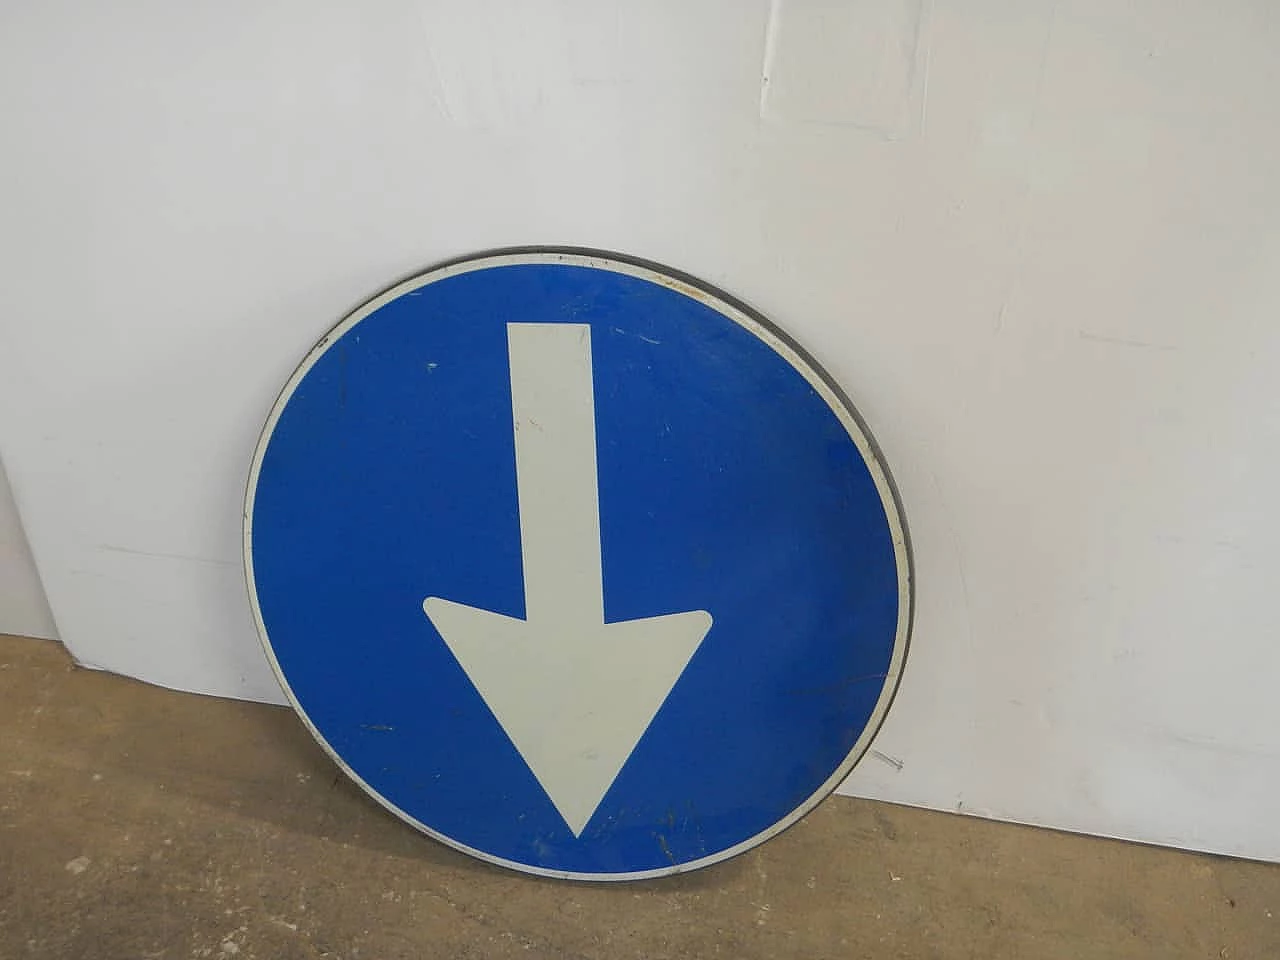 Road sign with directional arrow by Veneta snc 4